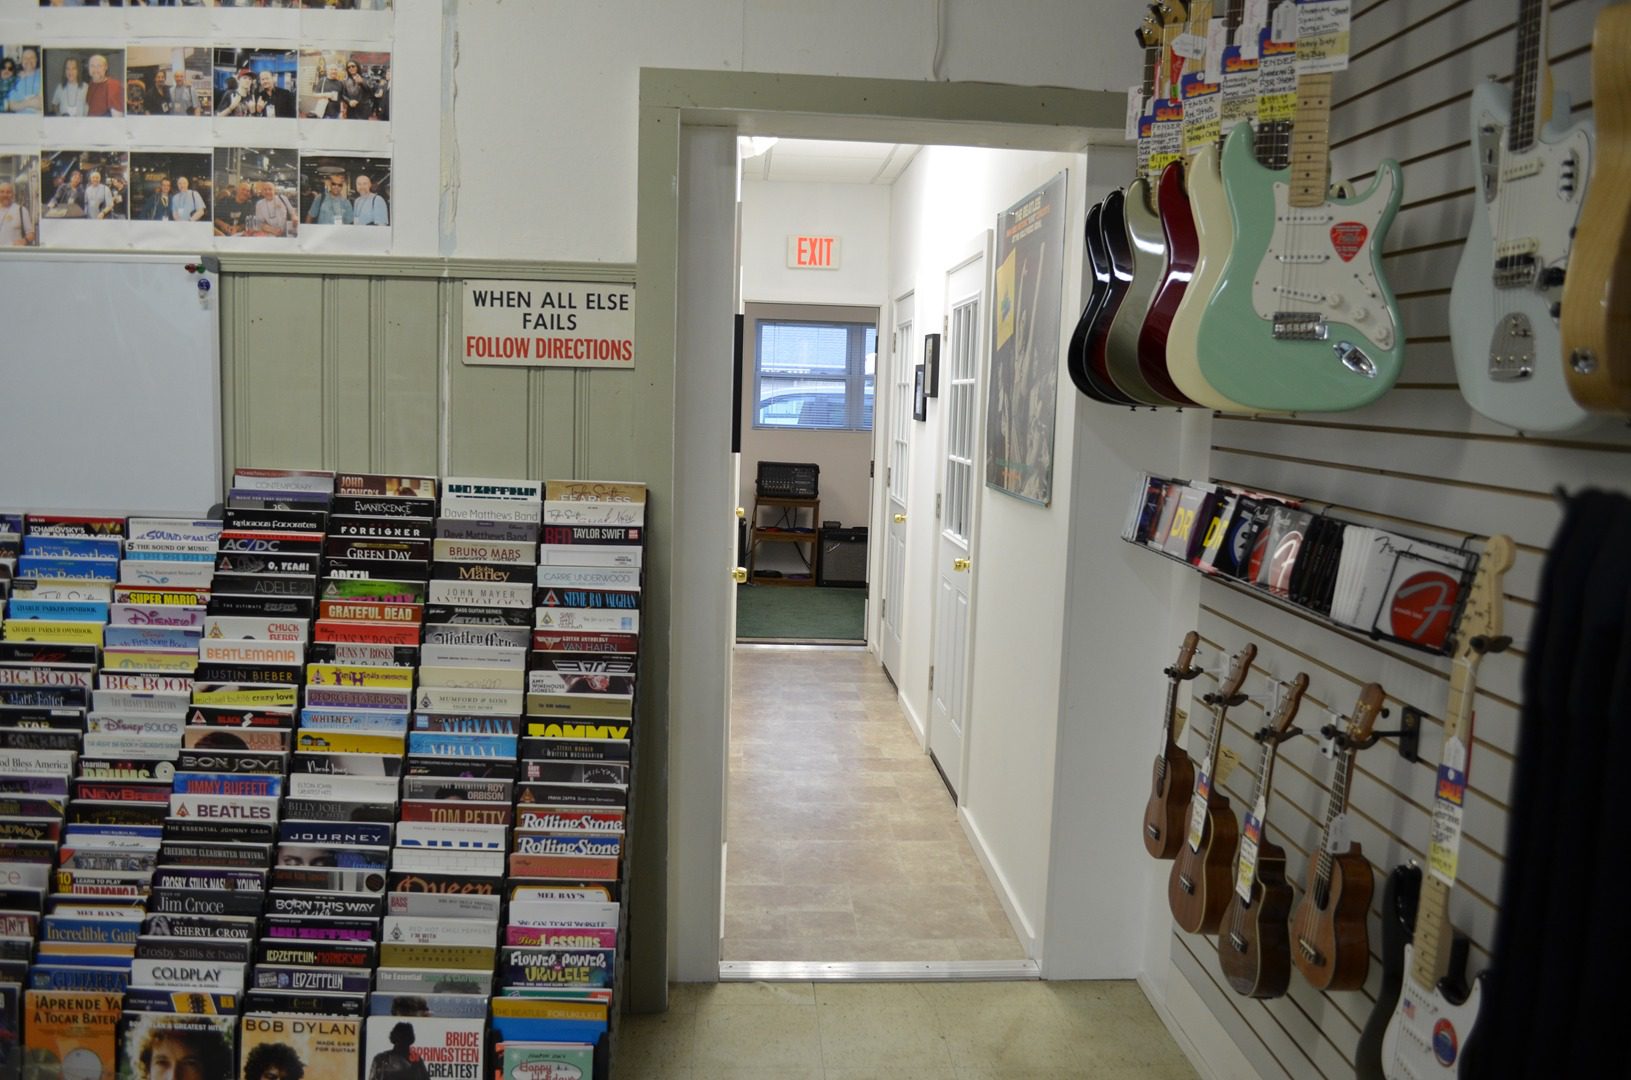 A room filled with lots of books and guitars.